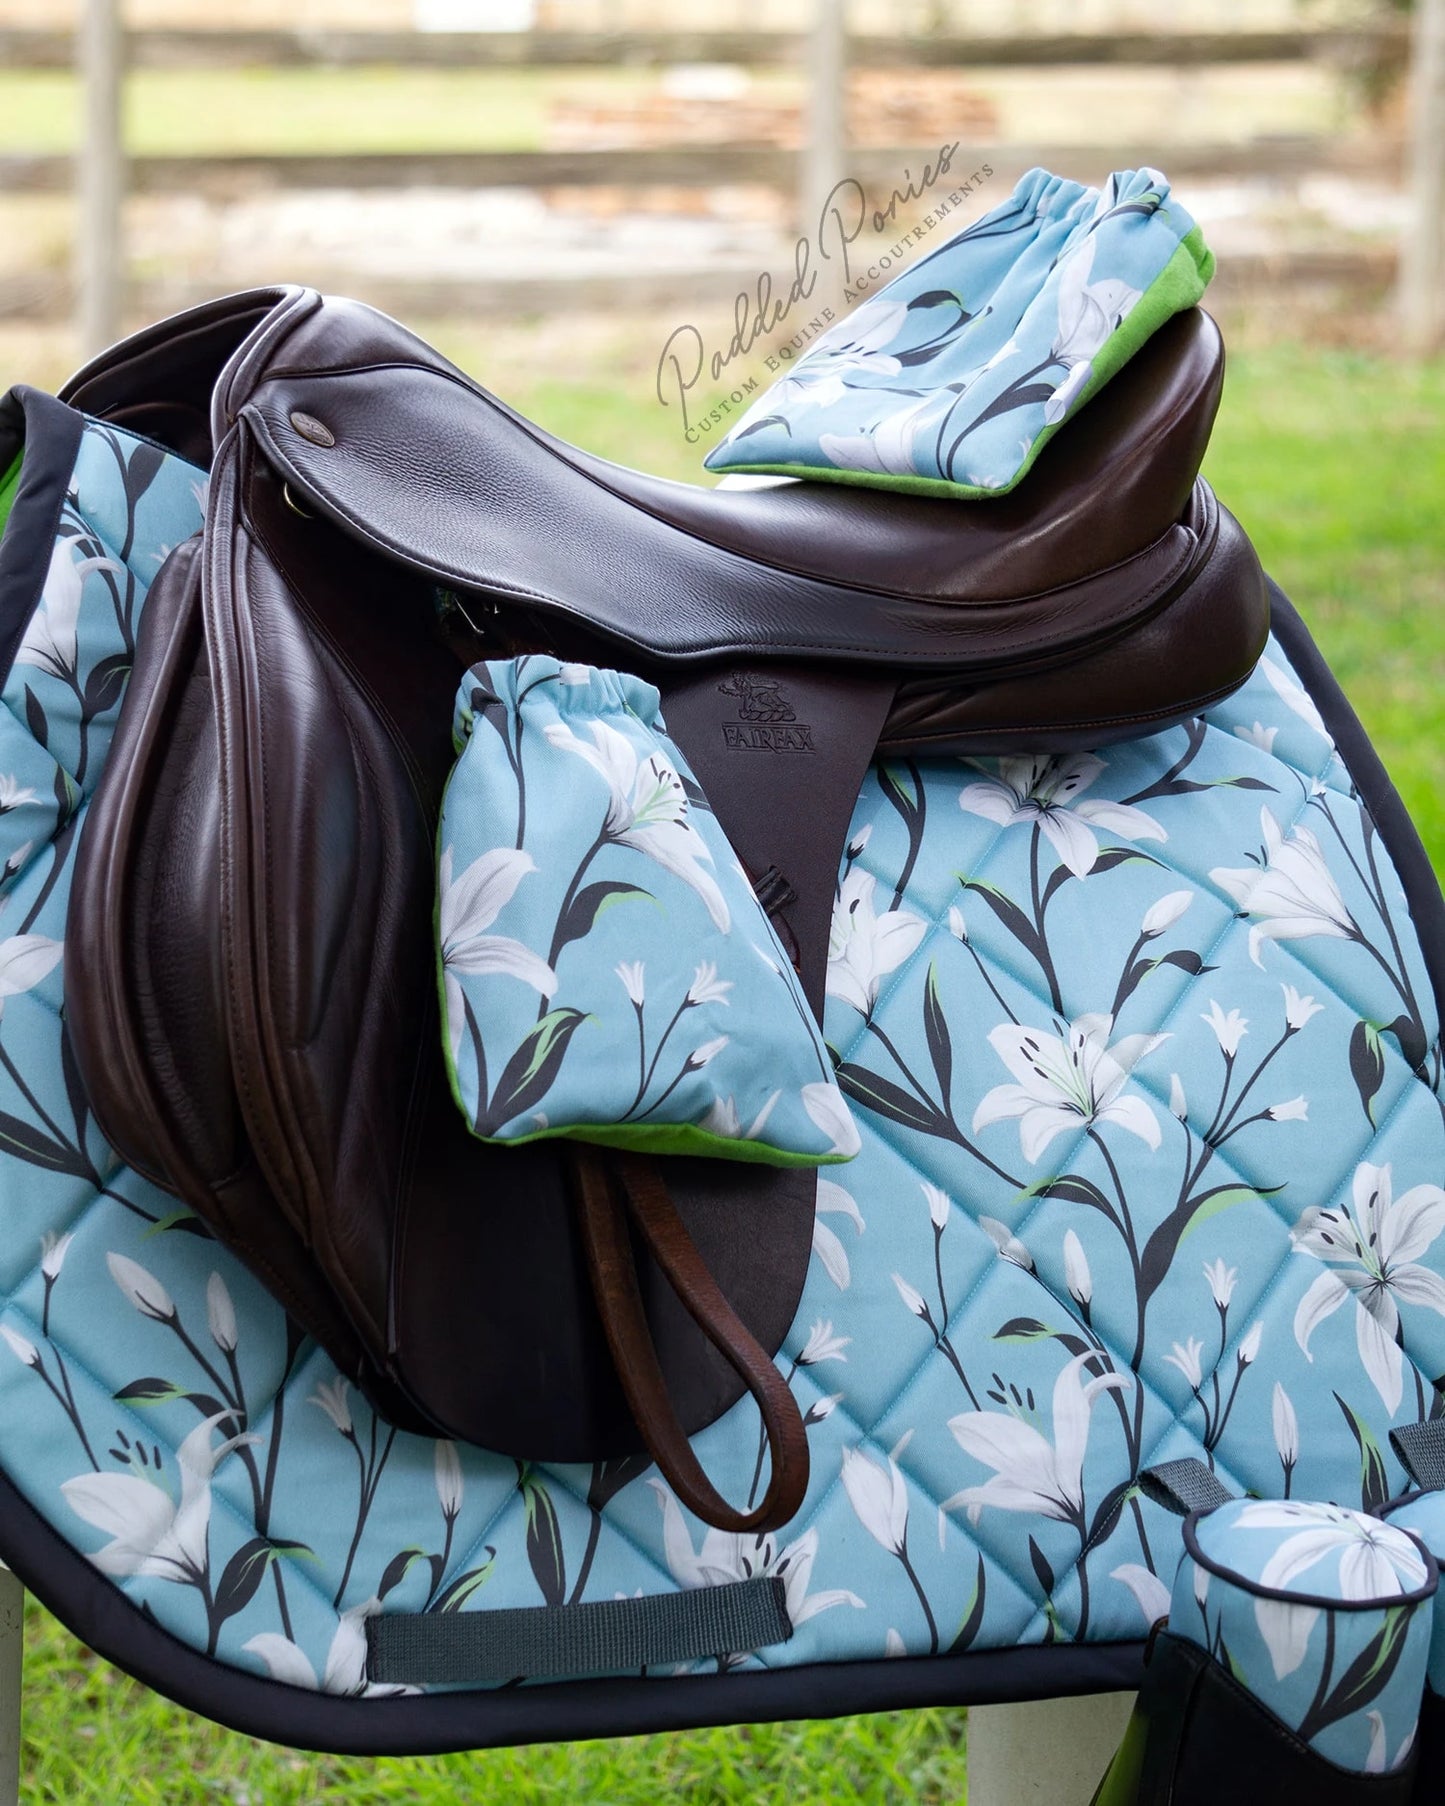 Baby Blue and Gray Lilies Floral All Purpose Saddle Pad with Matching Stirrup Covers and Boot Trees